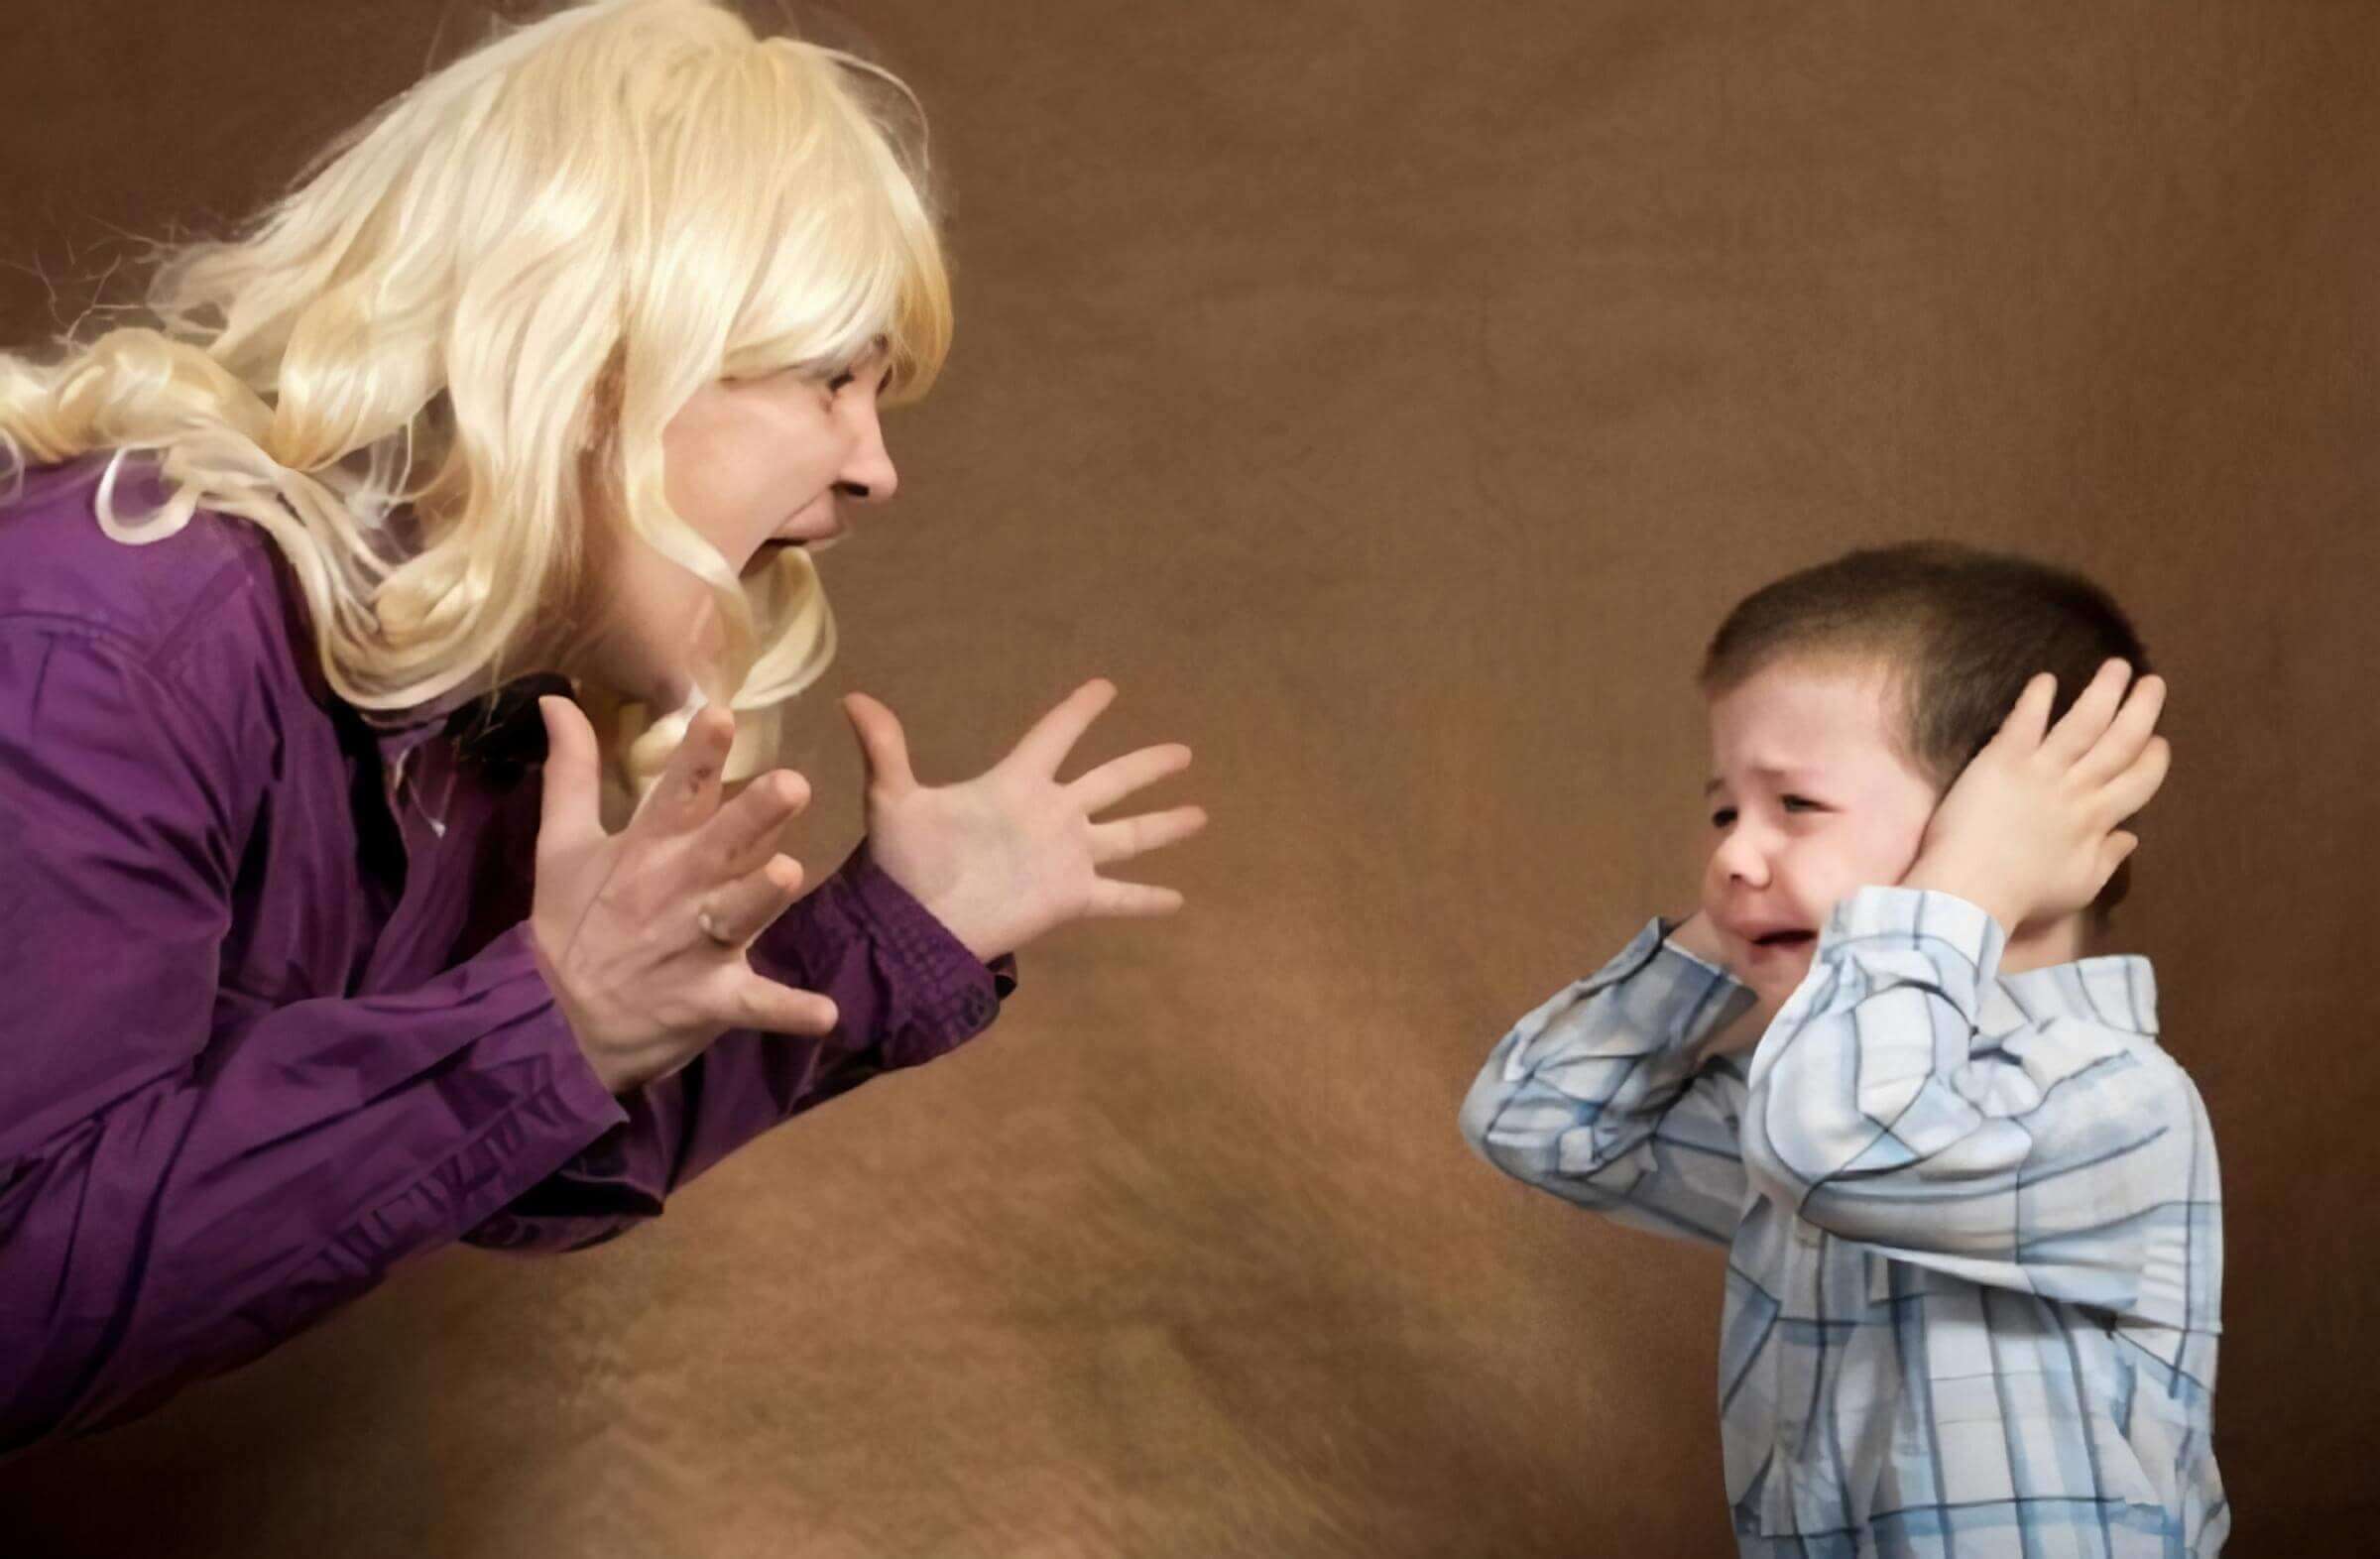 A woman screaming at a toddler boy who's covering his ears and crying.